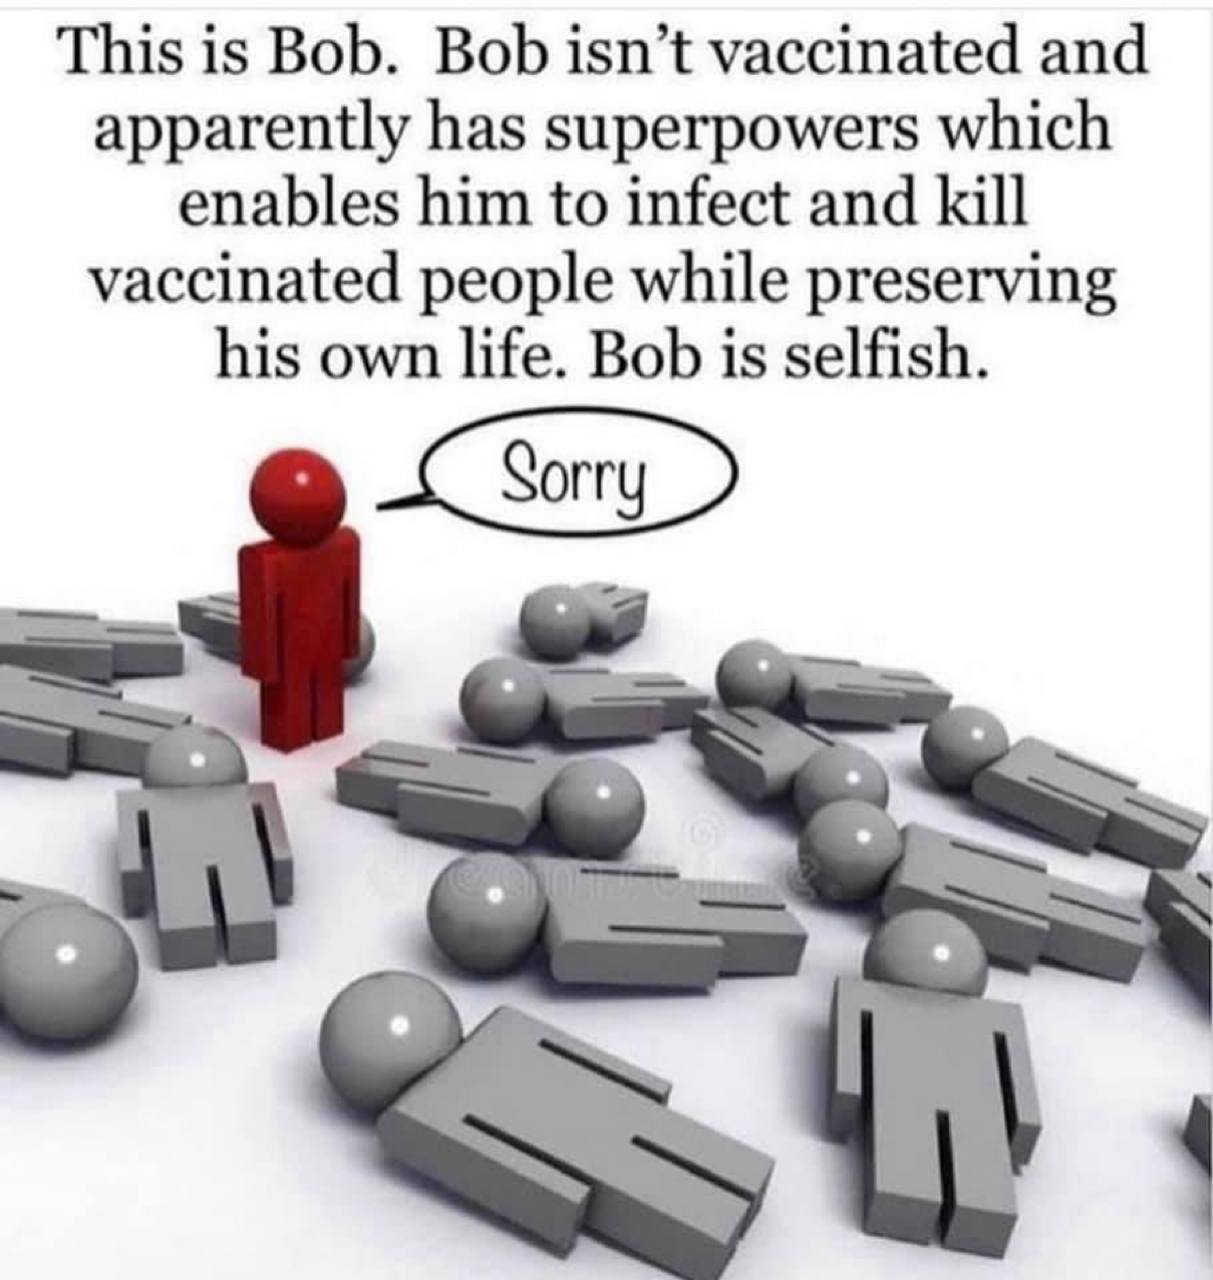 Bob has superpowers that kill vaccinated people